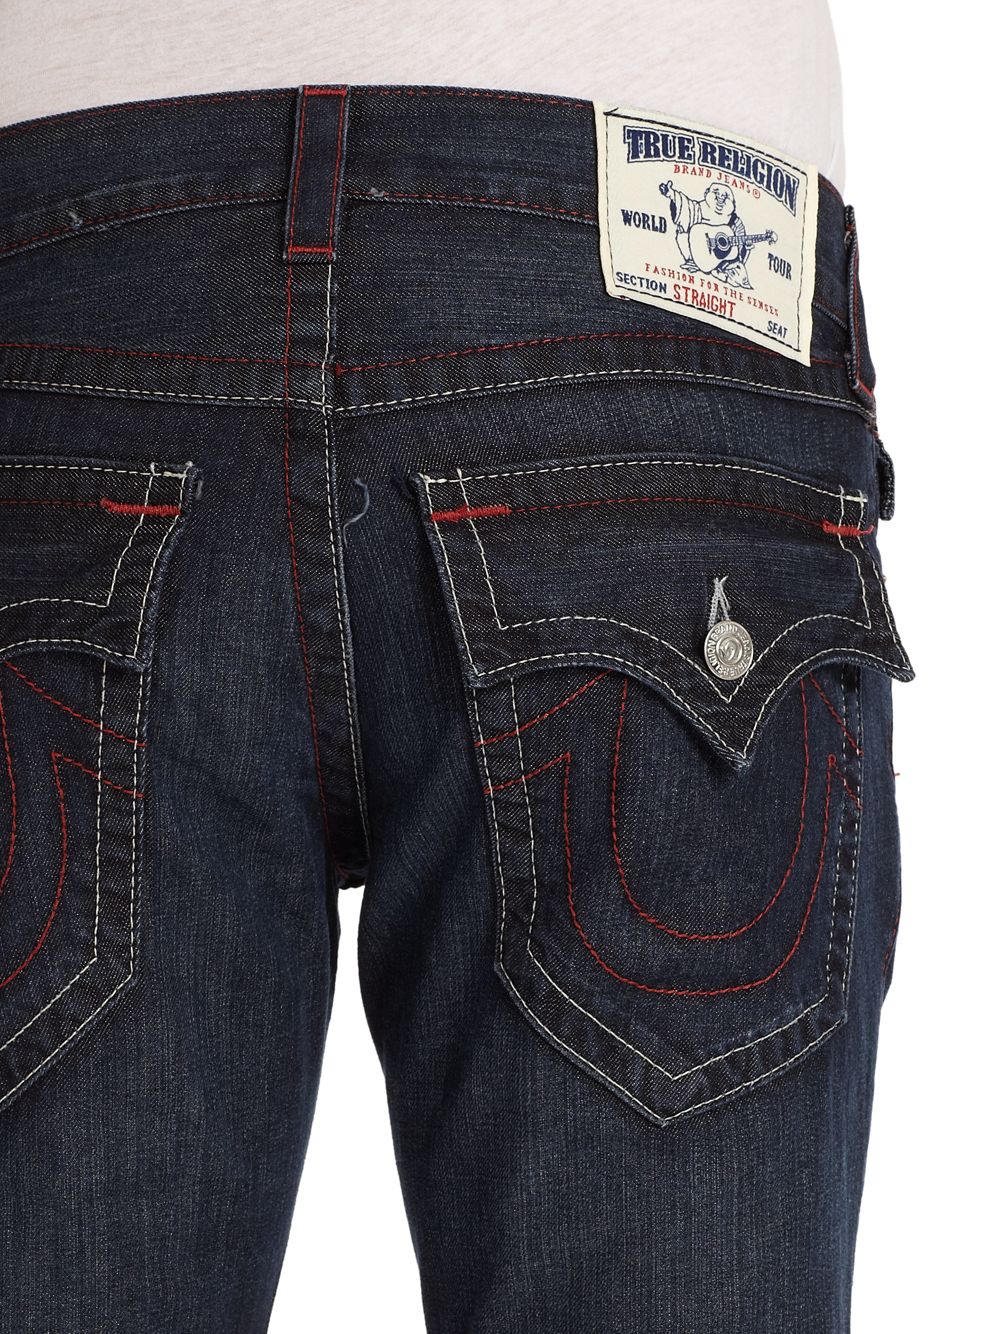 Lyst - True Religion Red Stitched Straightleg Jeans in Blue for Men